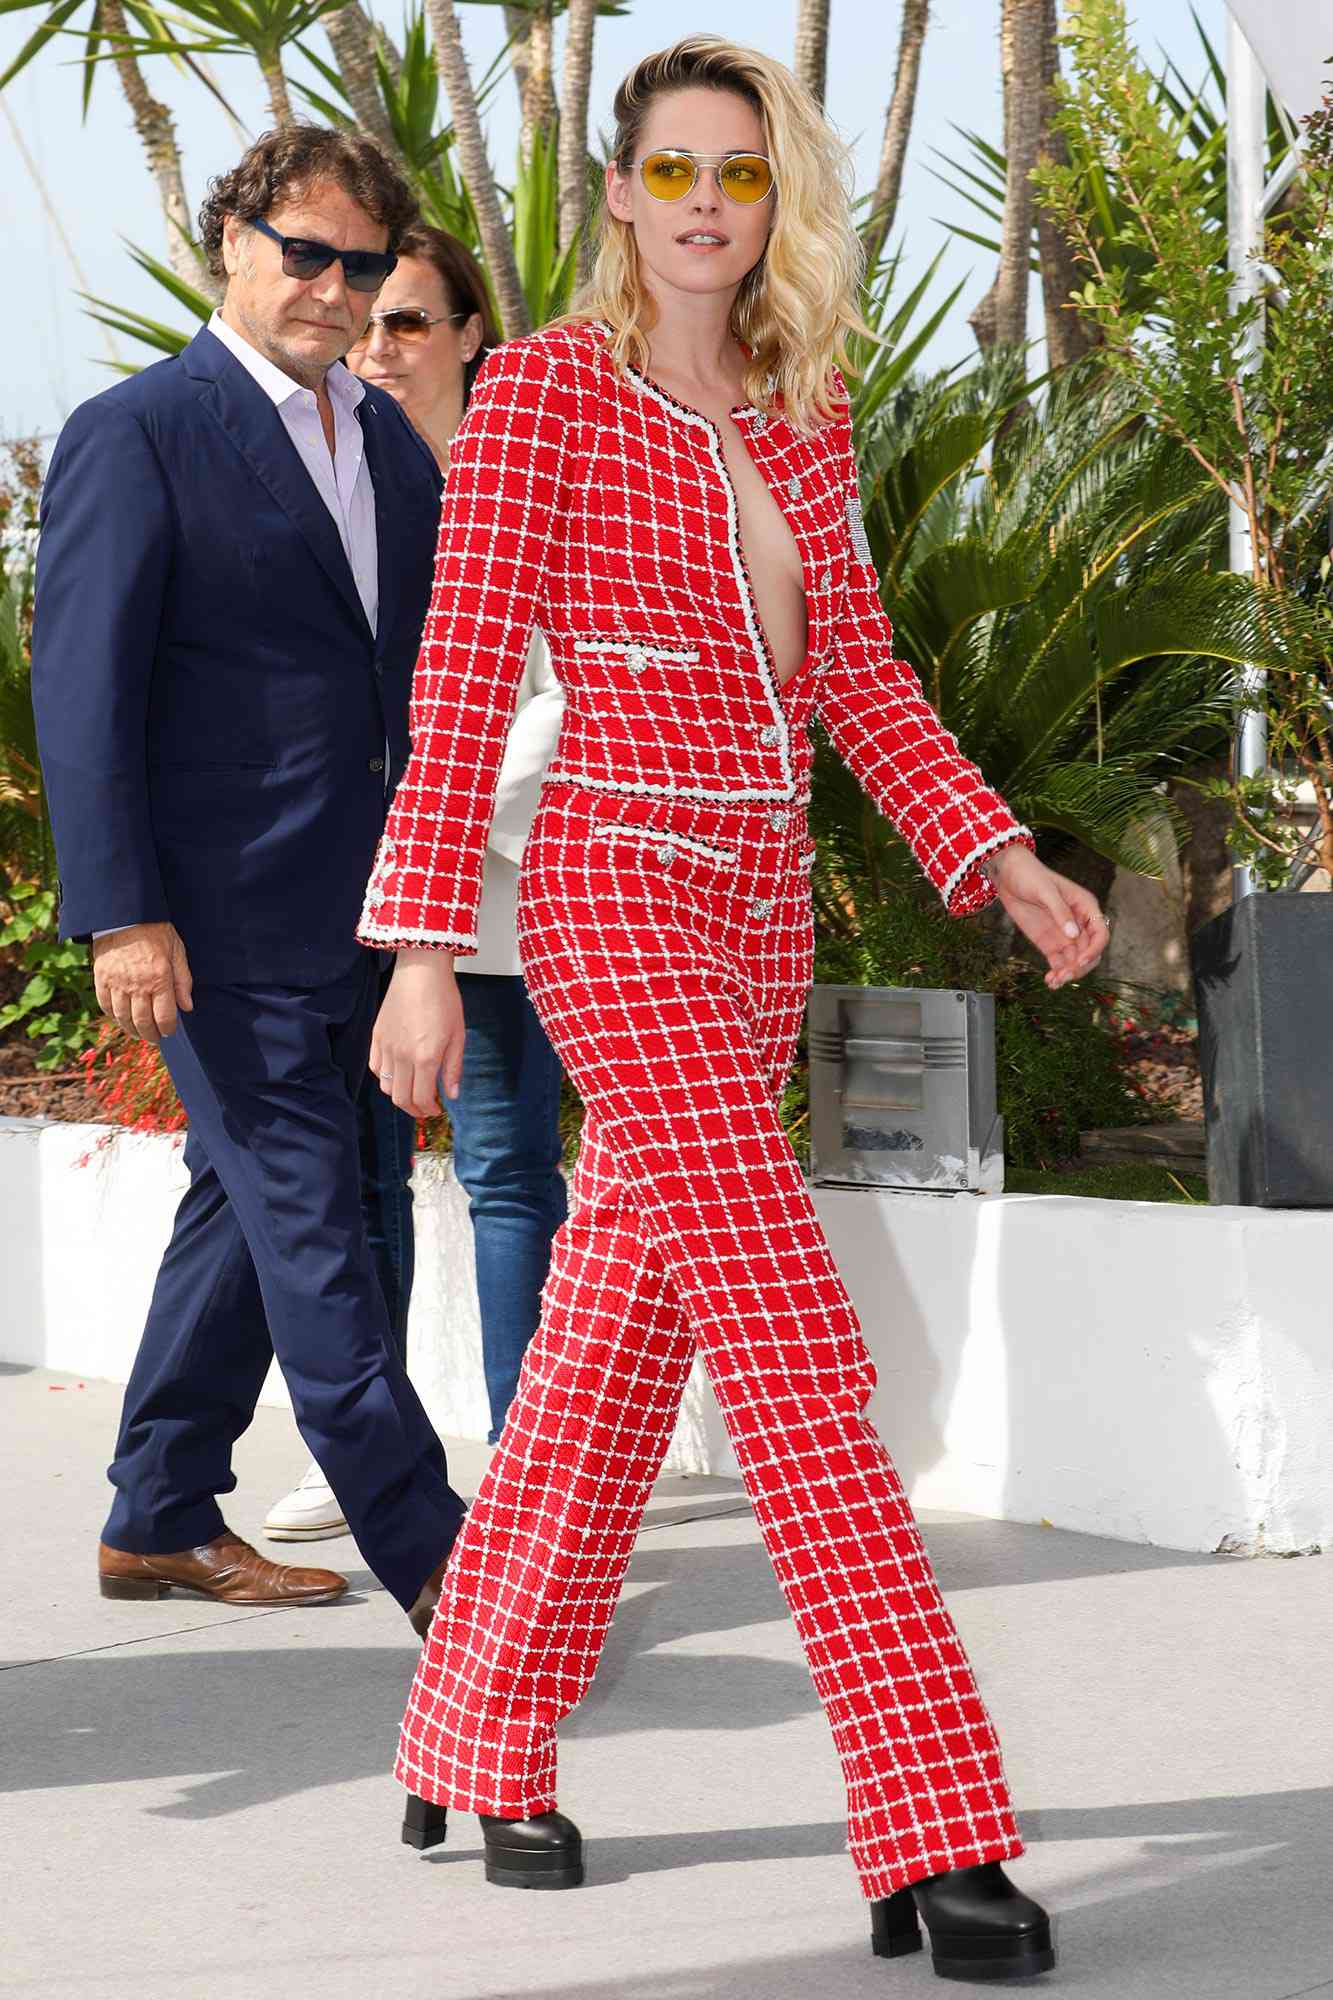 Cannes Film Festival 2022 Kristen Stewart attends the photocall for "Crimes Of The Future" during the 75th annual Cannes film festival at Palais des Festivals on May 24, 2022 in Cannes, France.